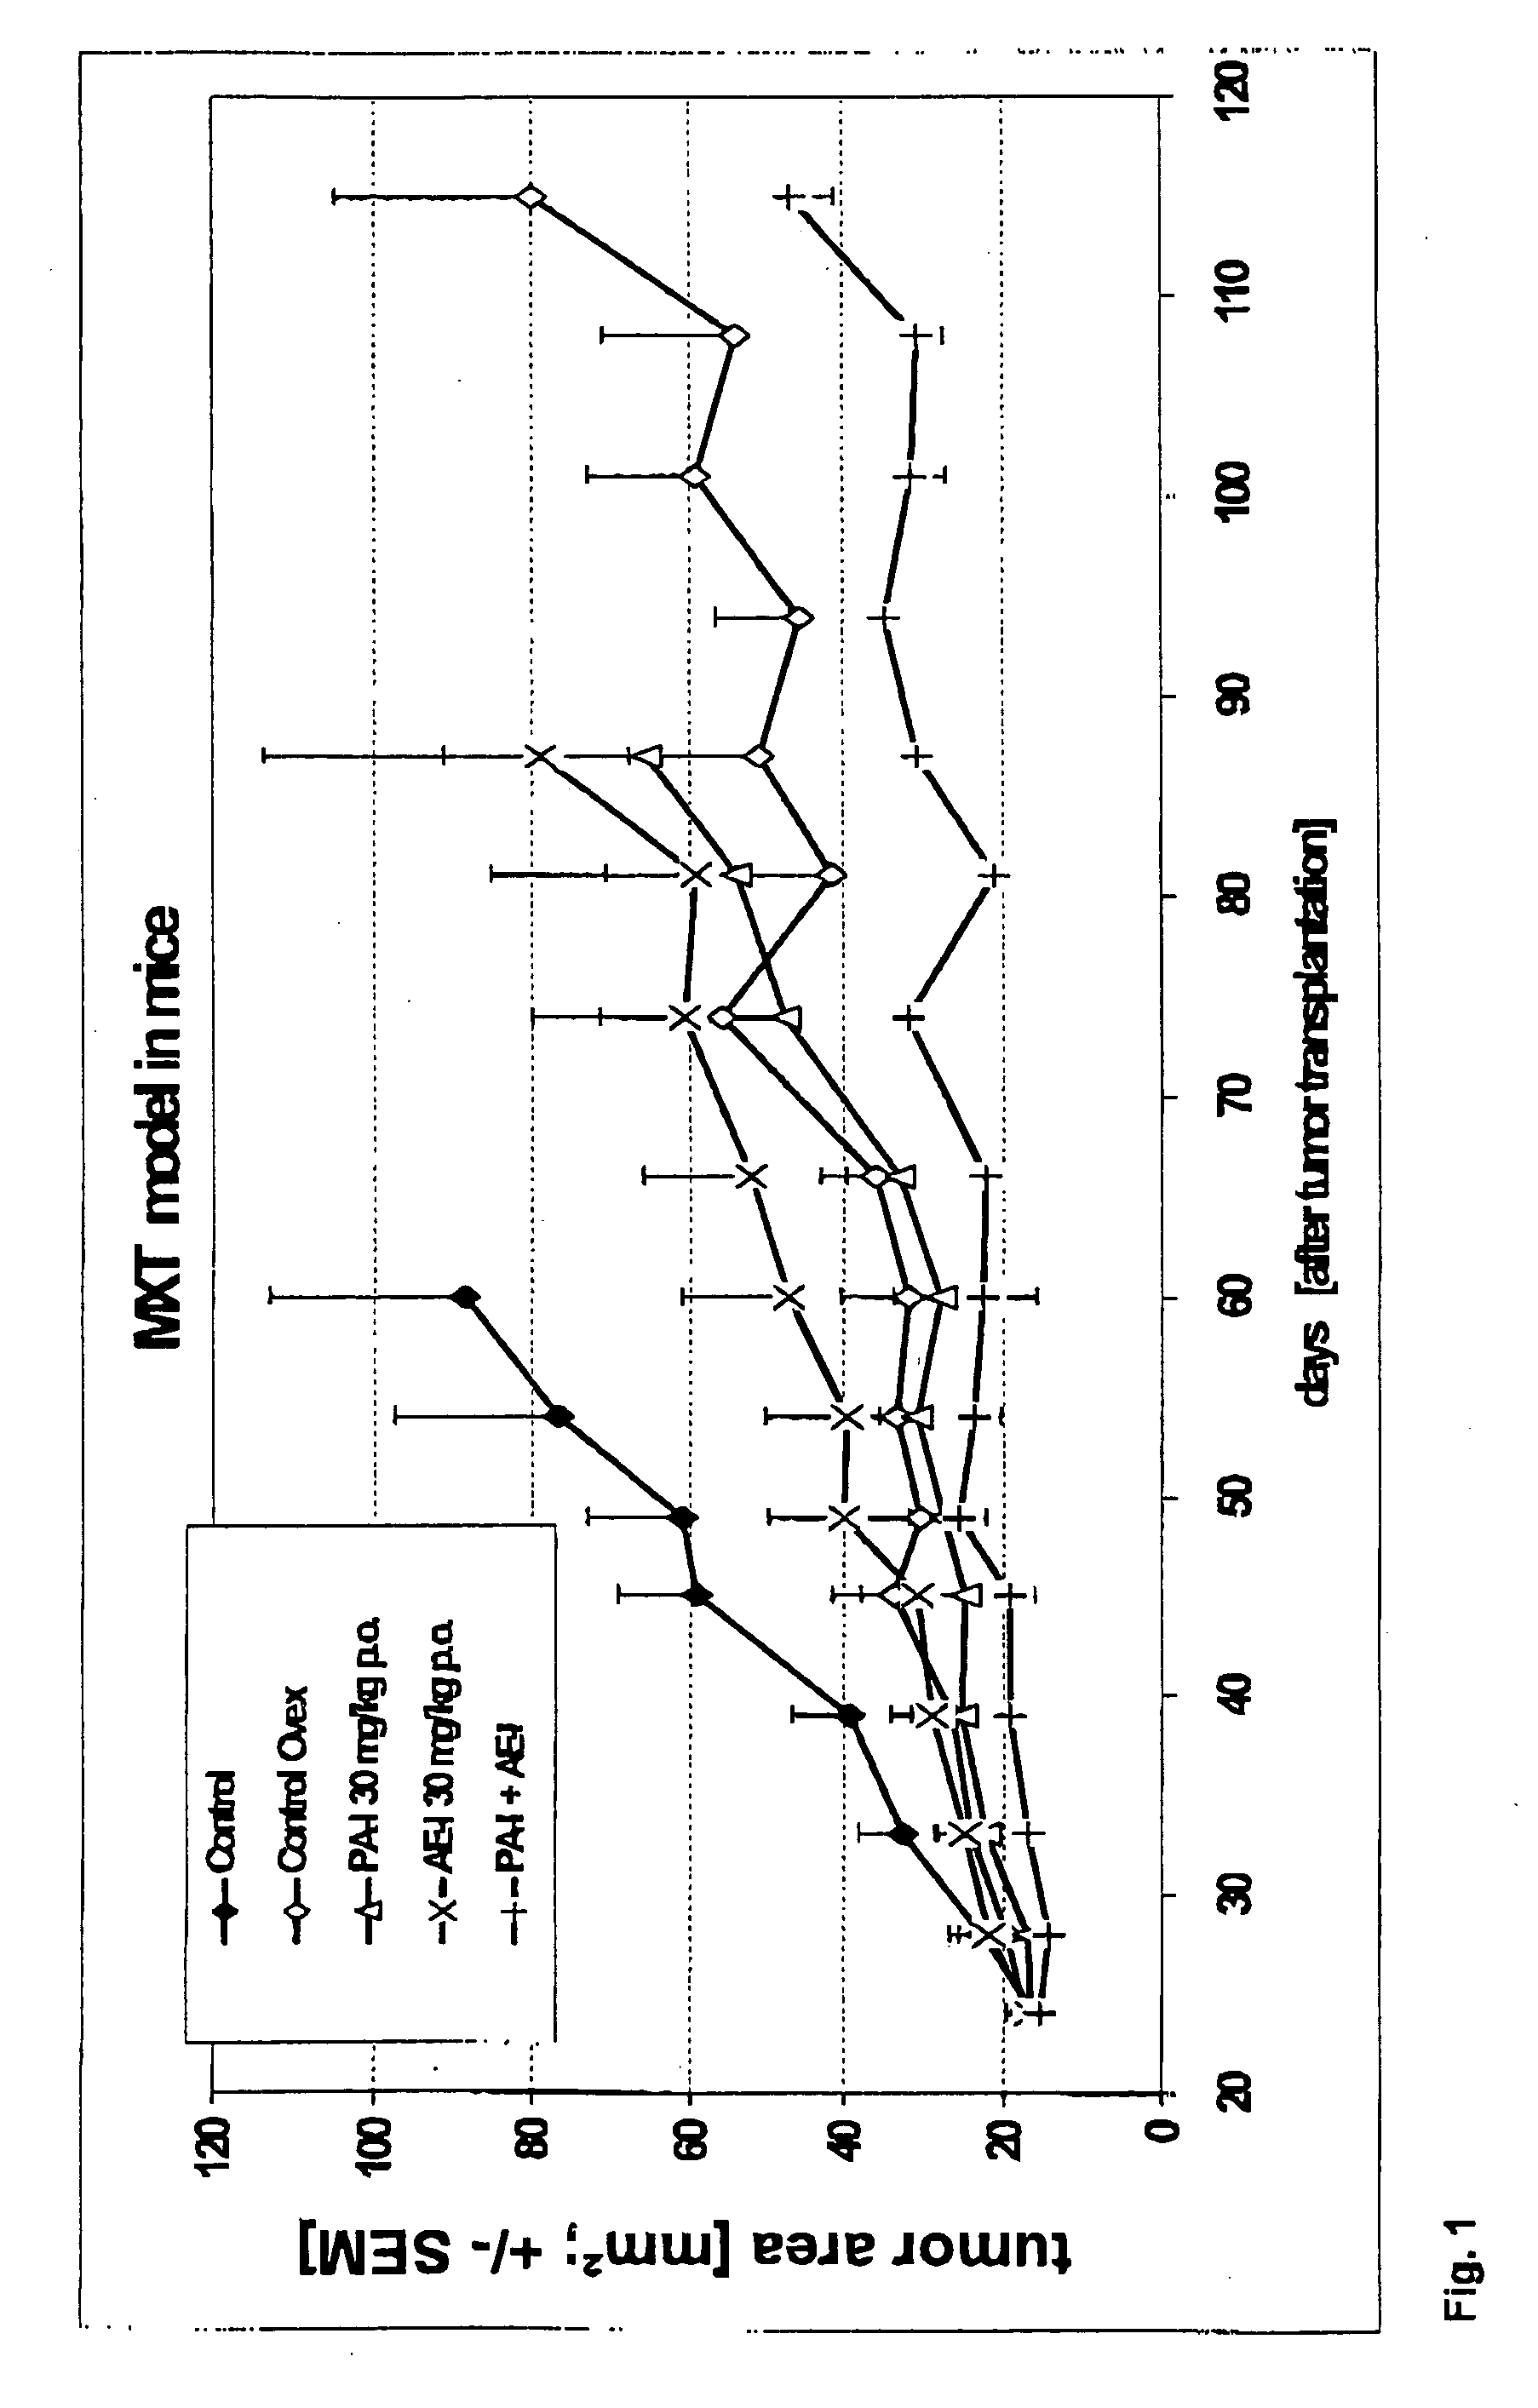 Composition comprising progesterone-receptor antagonists and pure antiestrogens for prophylaxis and treatment of hormone-dependent diseases